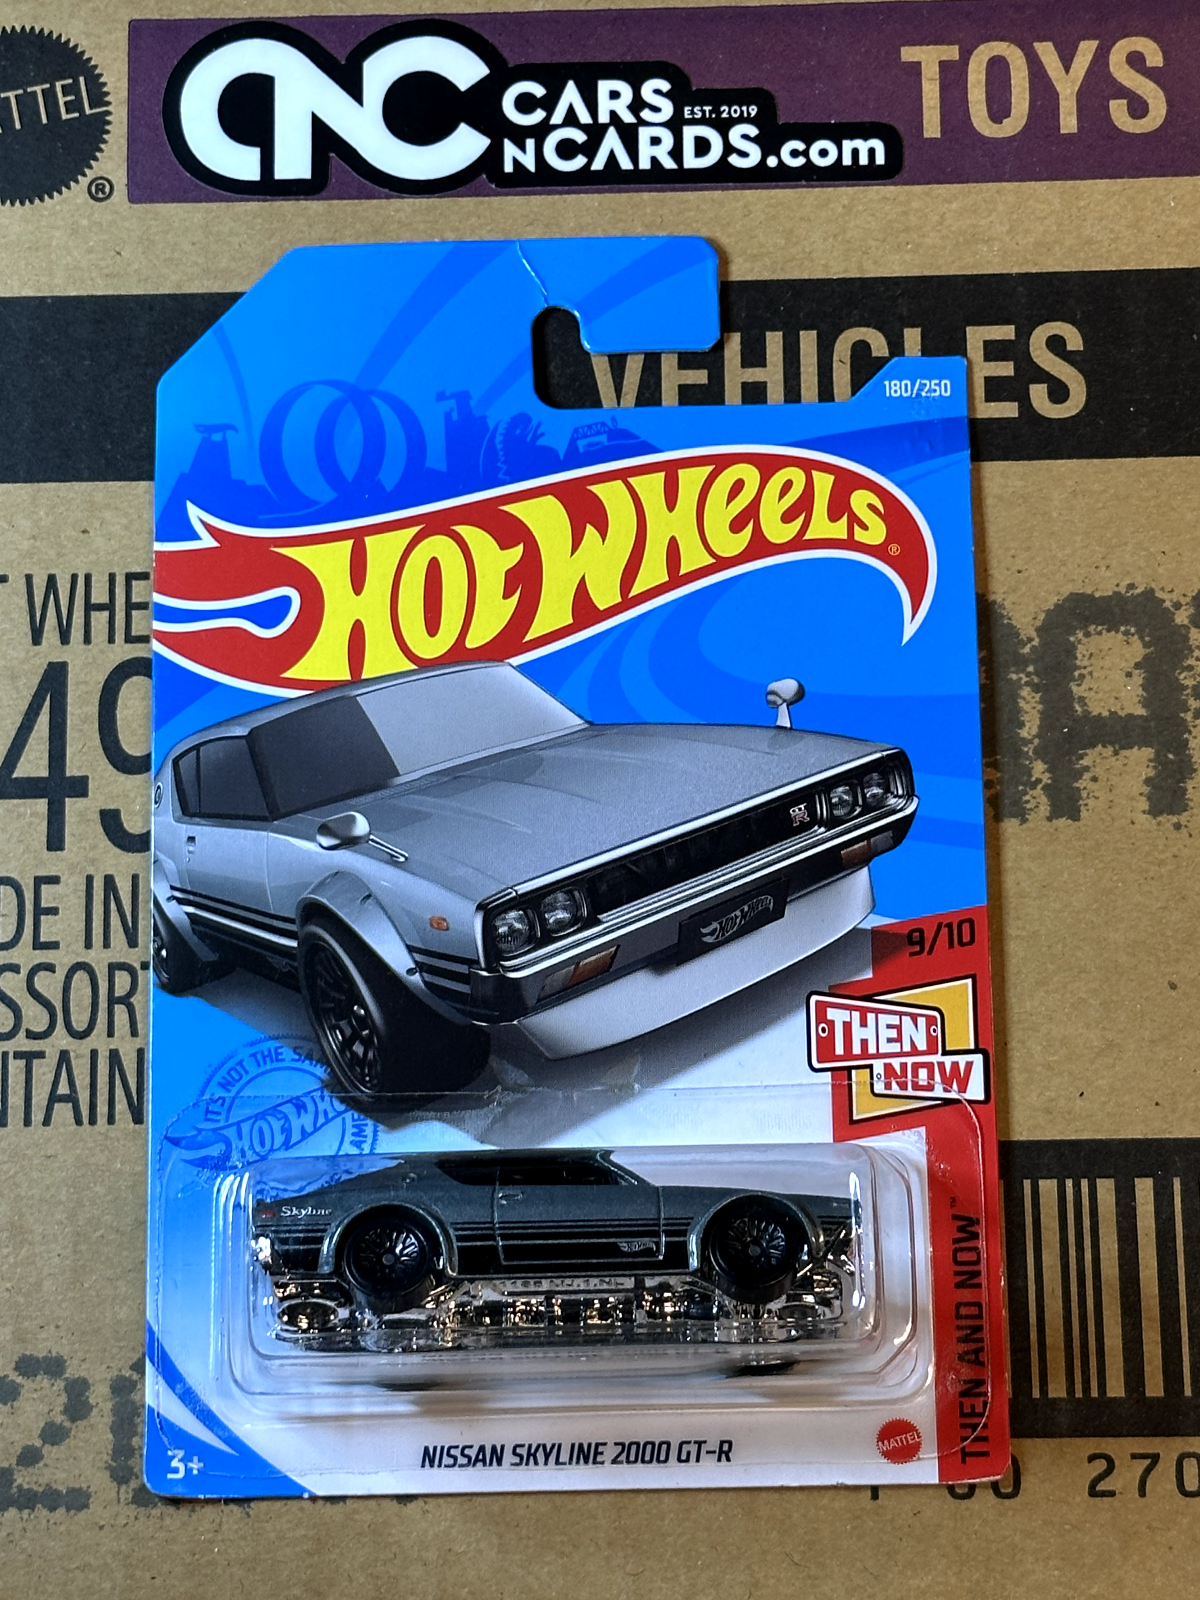 2021 Hot Wheels Then And Now 9/10 Nissan Skyline 2000 GT-R (Card Crease)